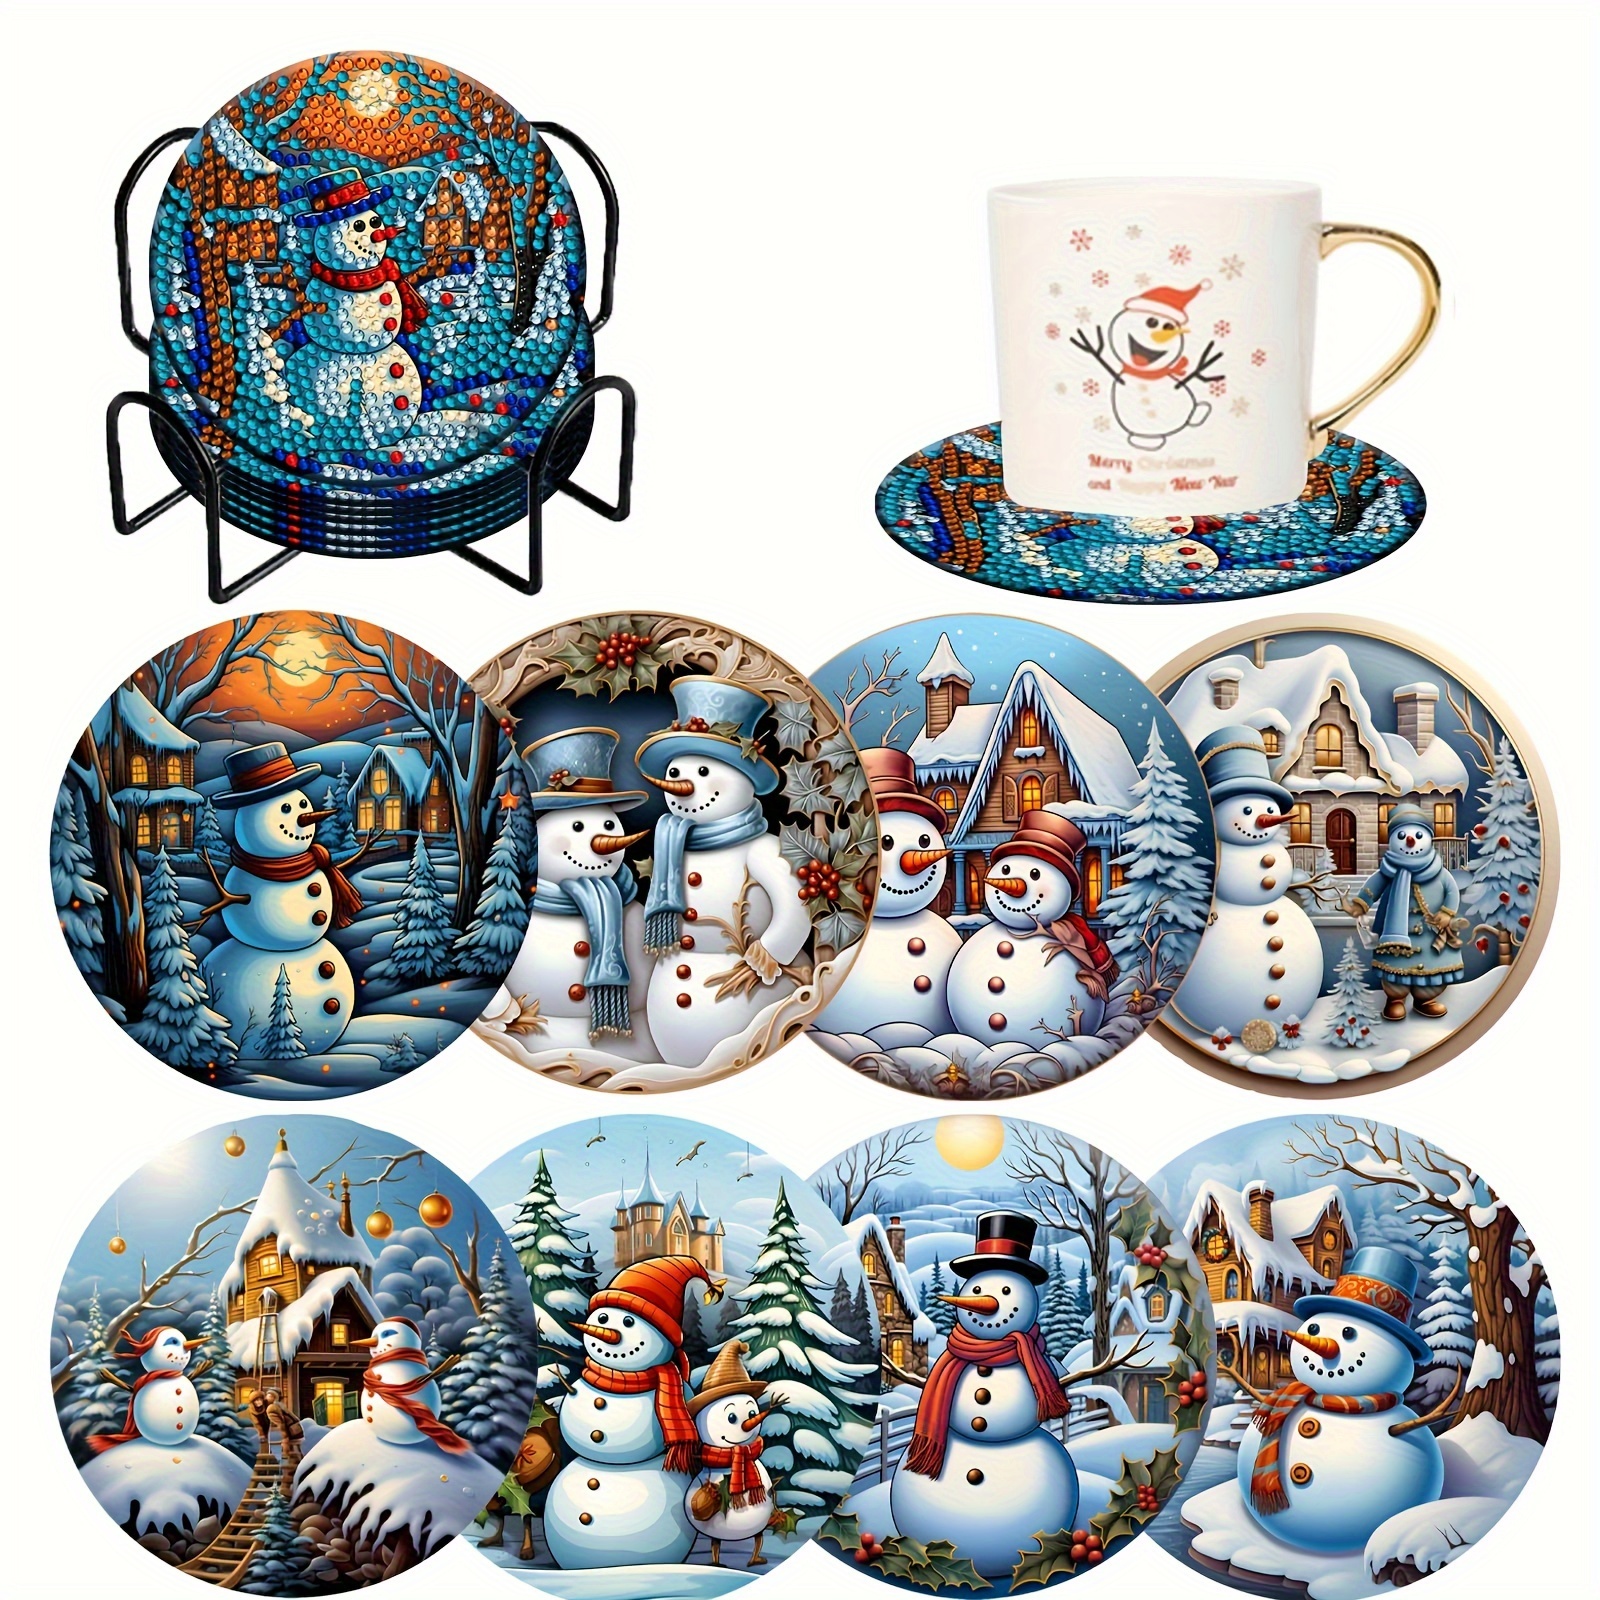 

8-piece Diamond Painting Coaster Set With Stand - Diy Full Drill Craft Kit For Beginners, Round Diamonds, Festive Christmas Snowman Design Snowman Diamond Painting Kits Snowman Diamond Art